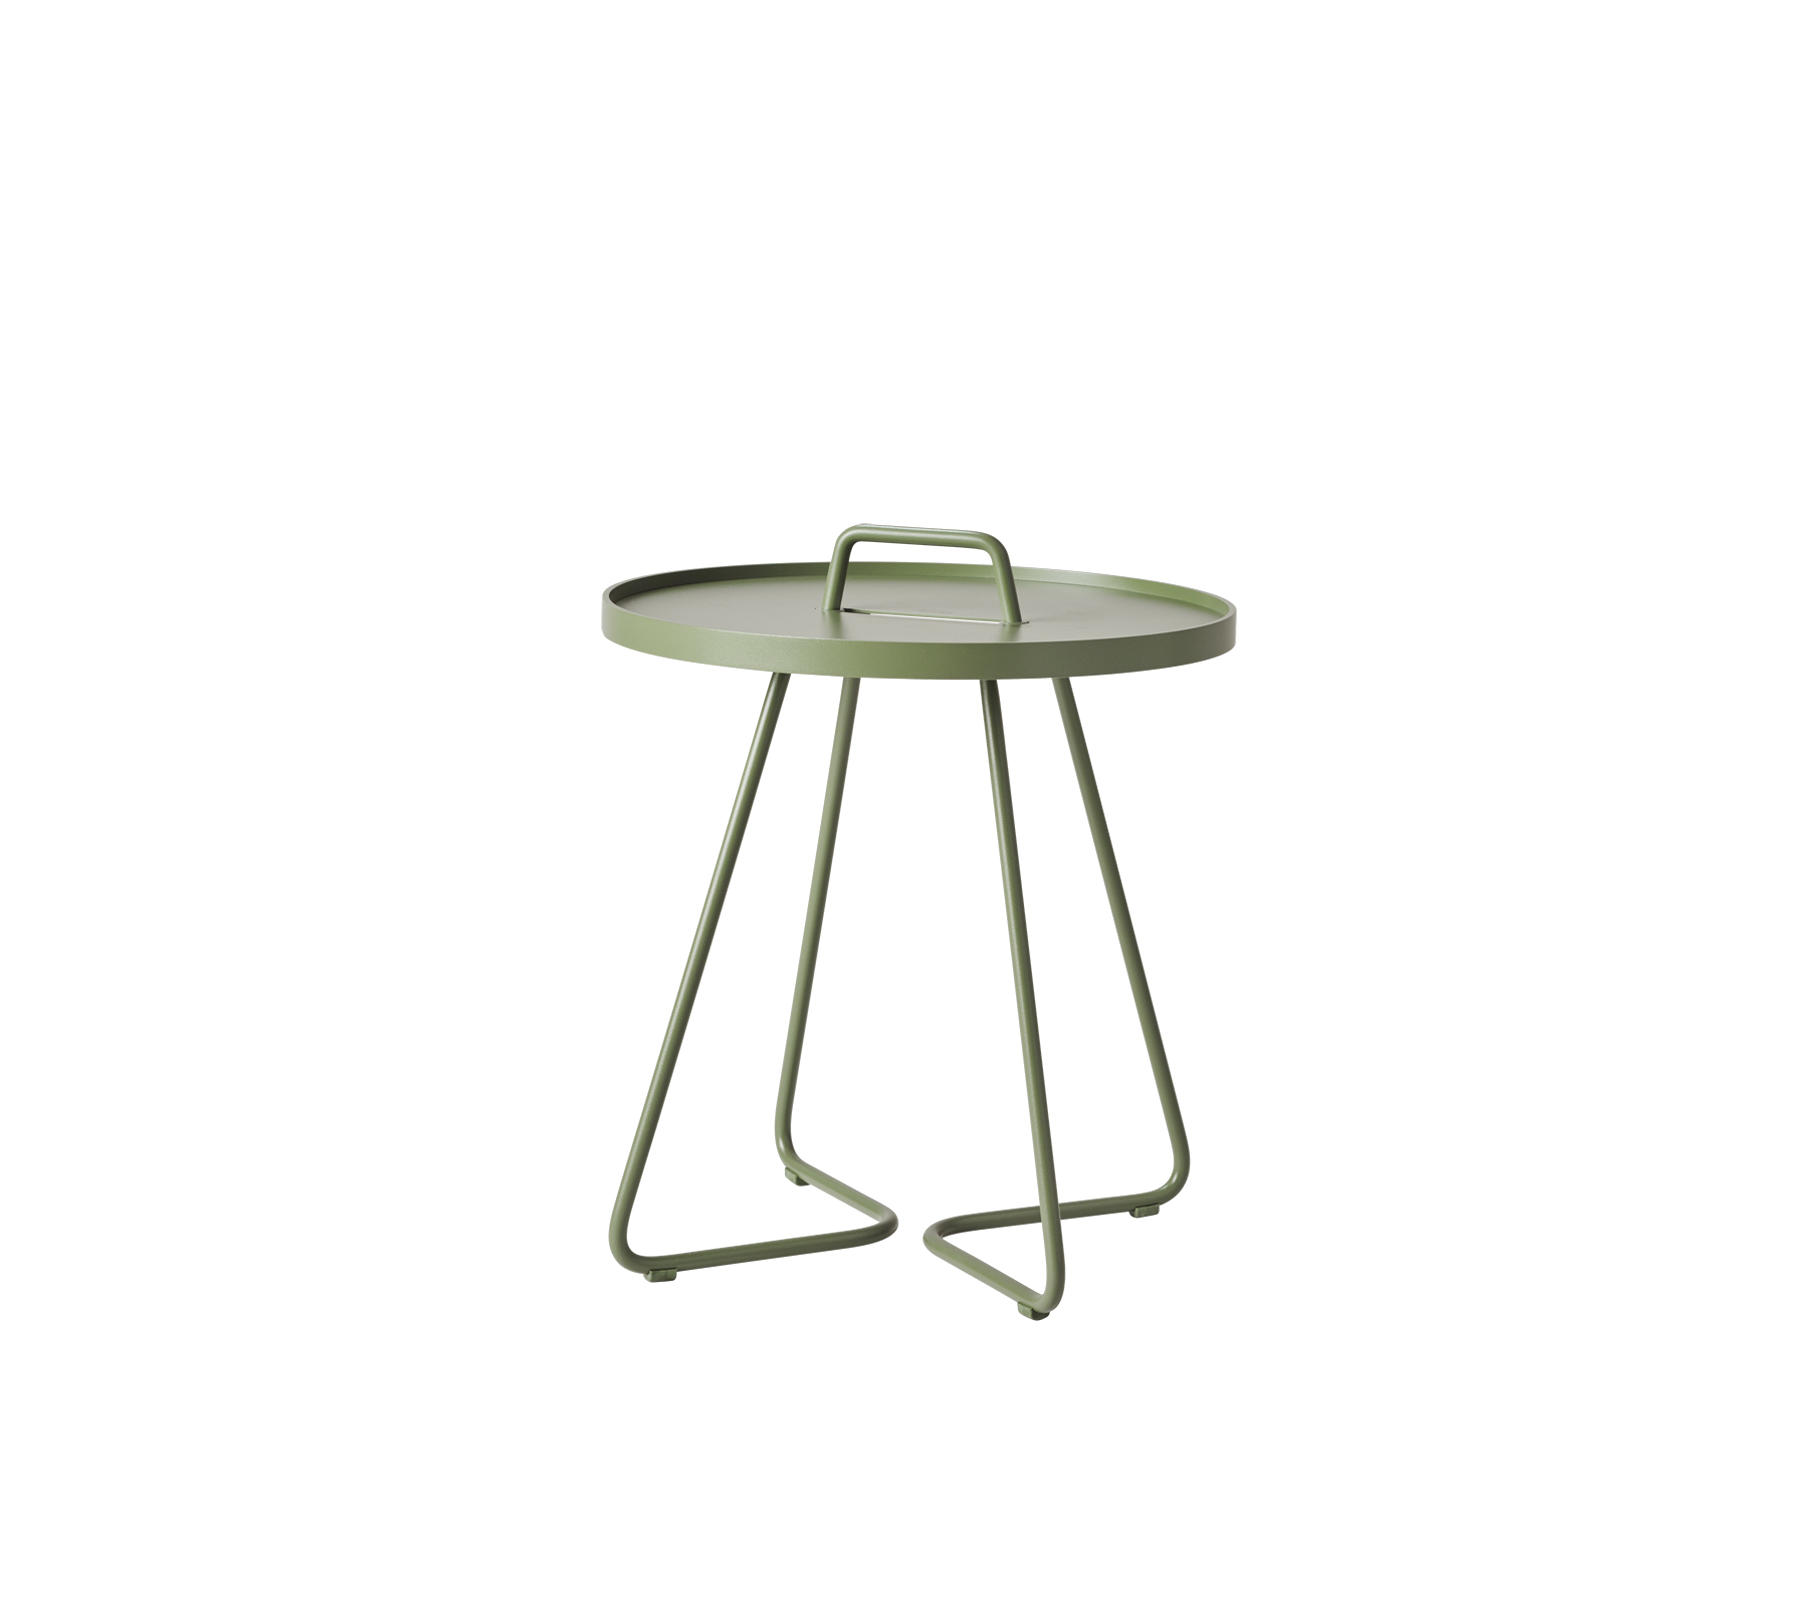 Cane-line - On-the-move side table, small